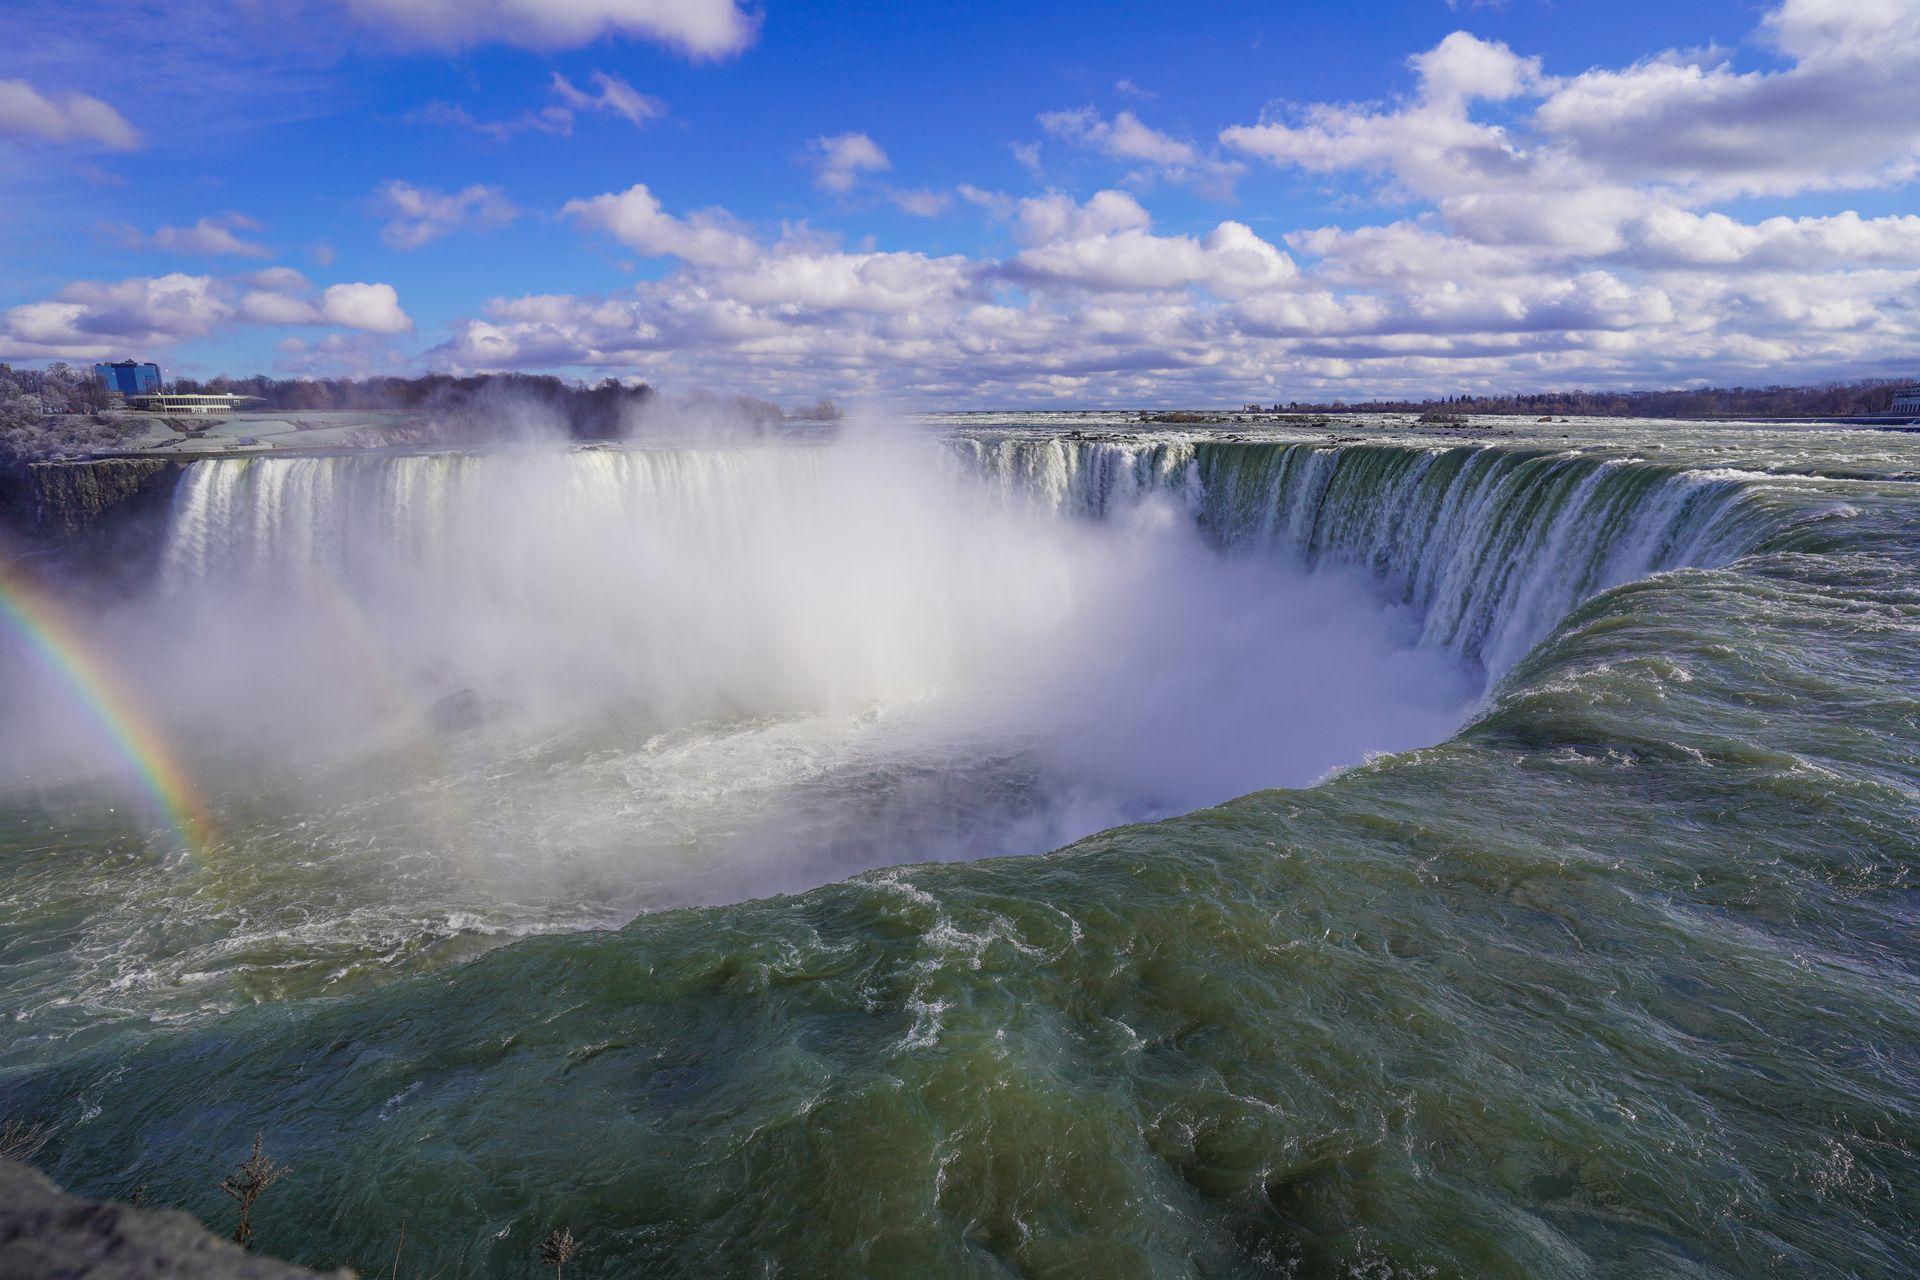 A view of Horseshoe Falls from Canada. There is a rainbow on the left side of the photo.